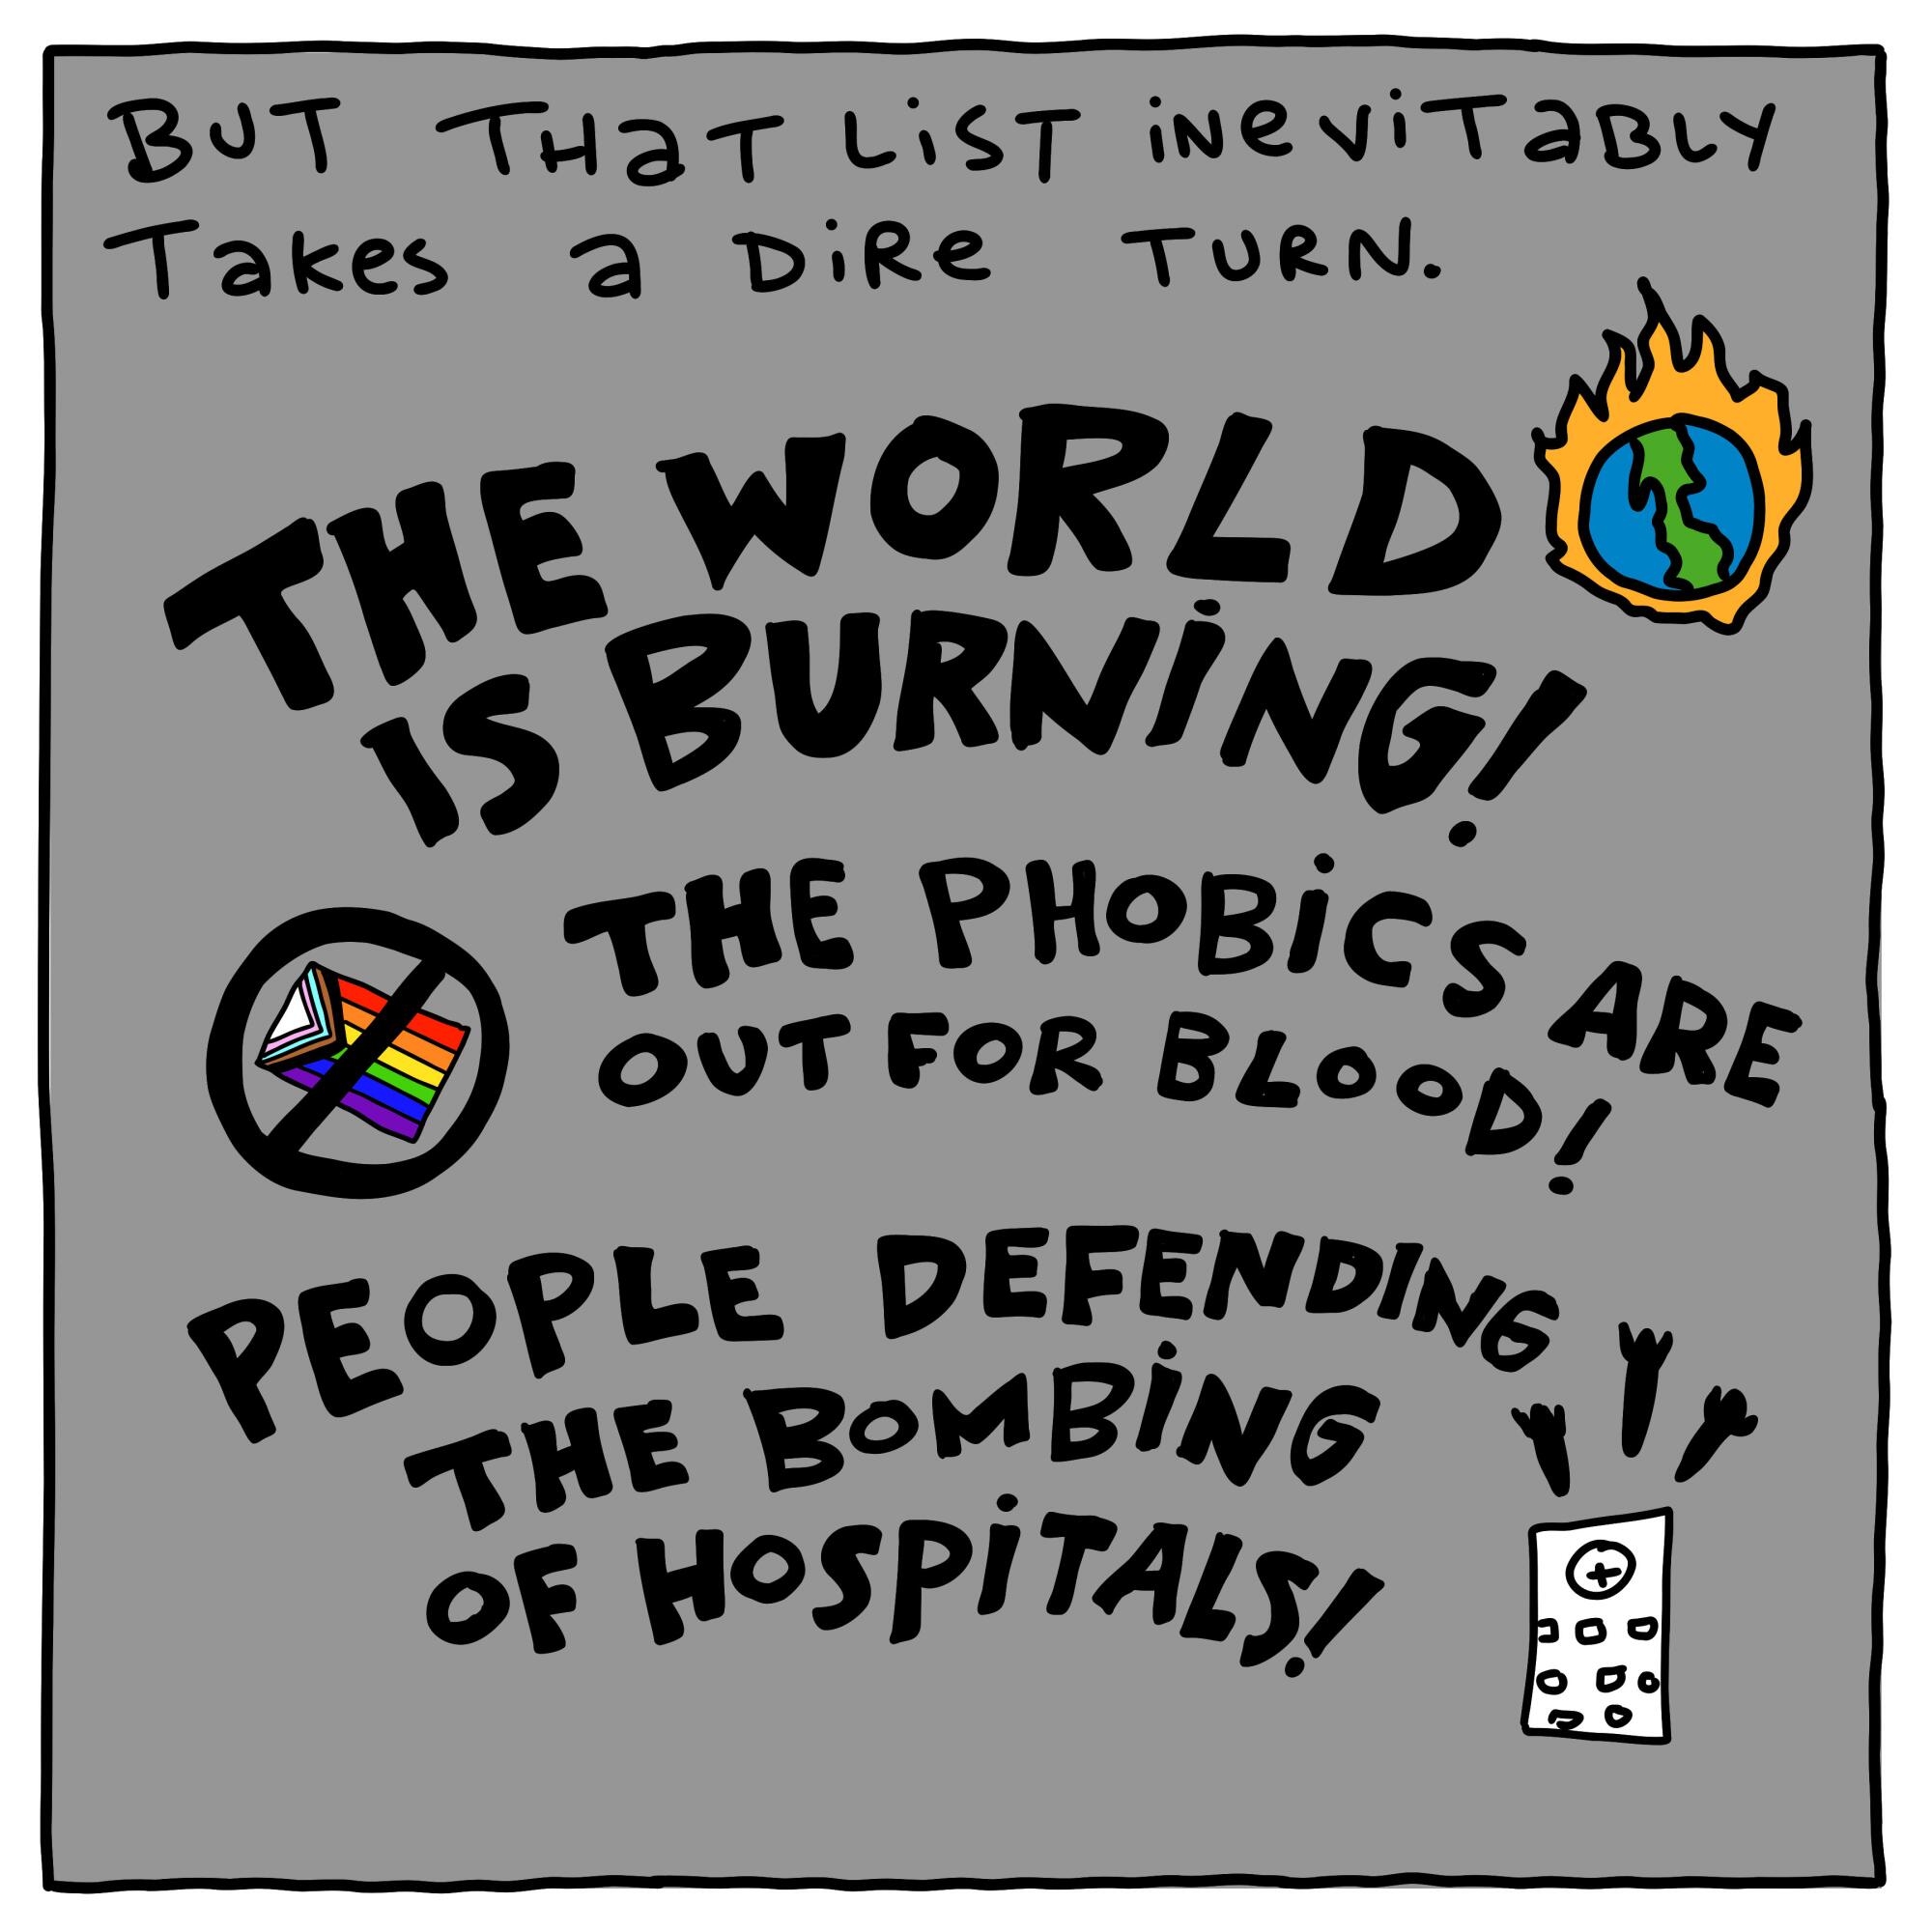 But that list inevitably takes a dire turn. "The world is burning"